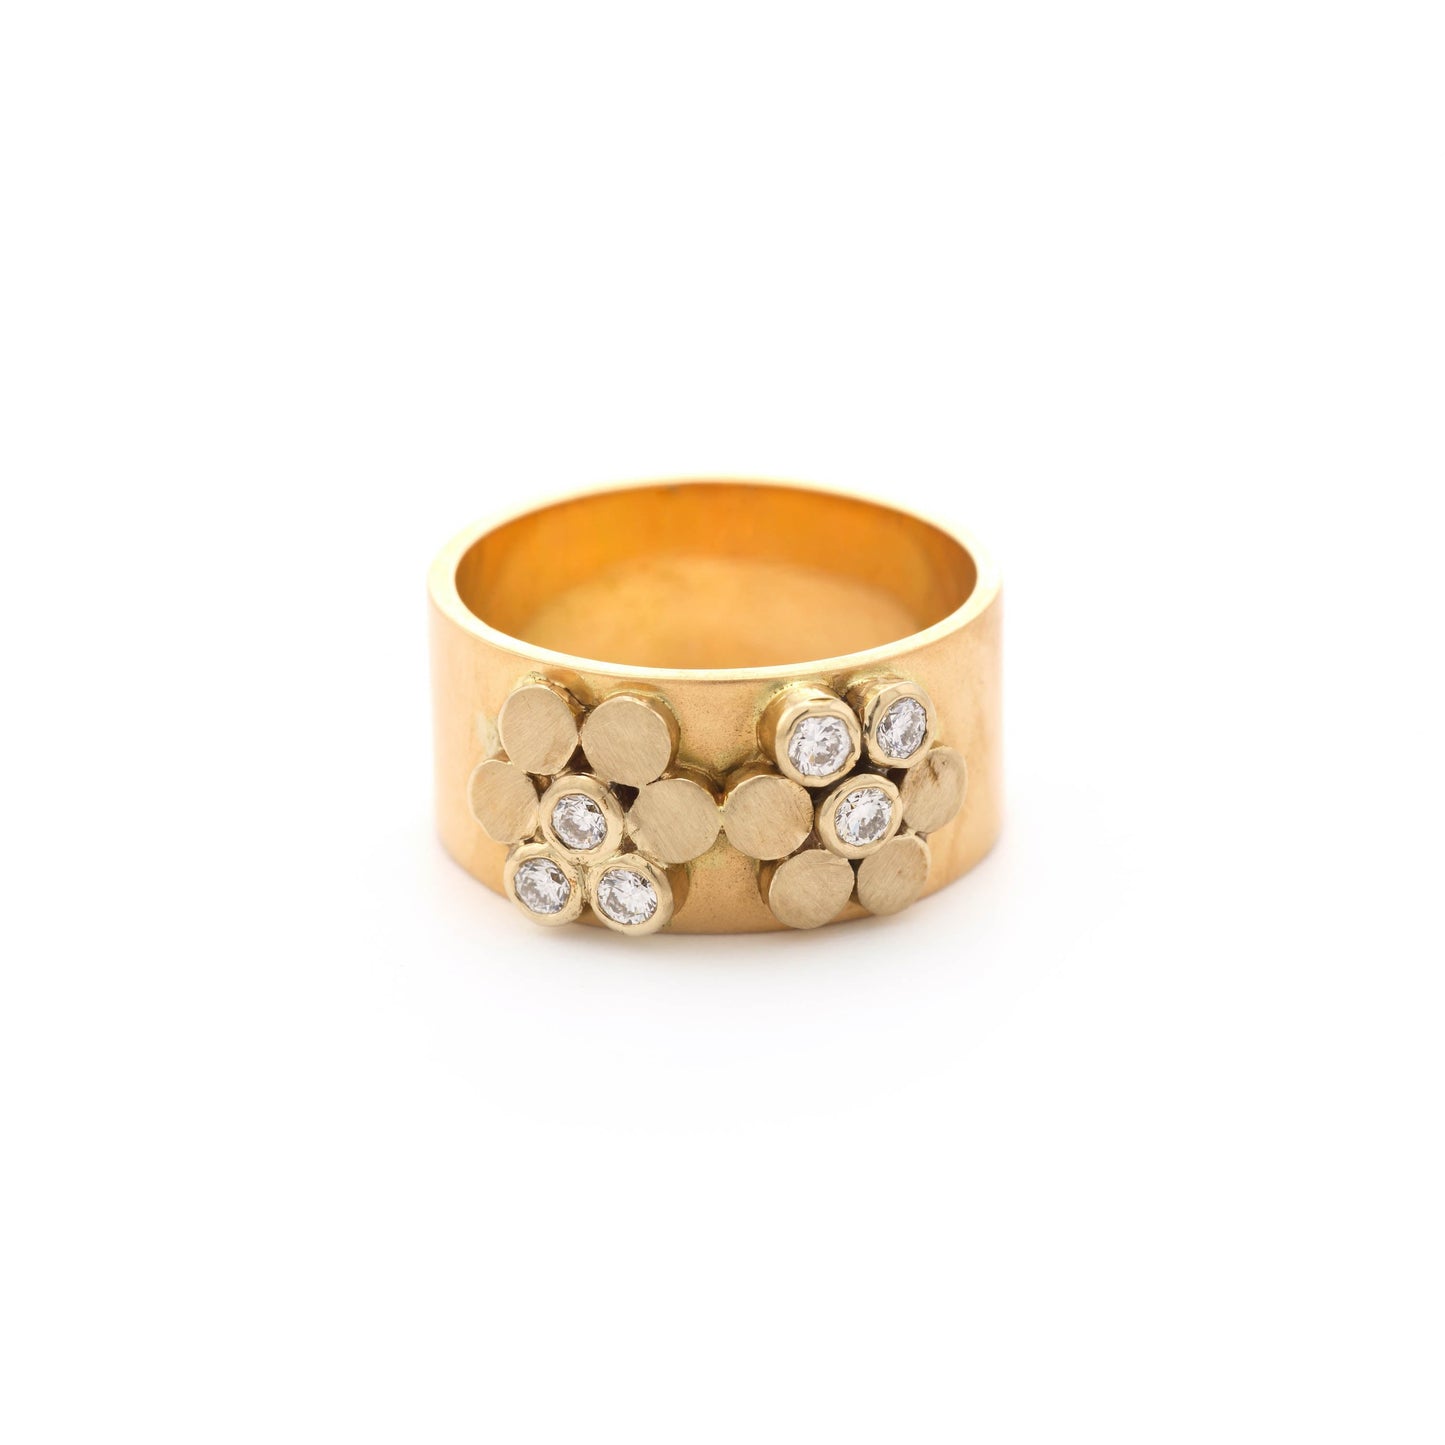 The Sucharitra Primulus Series Gold and Diamond Ring by Rasvihar